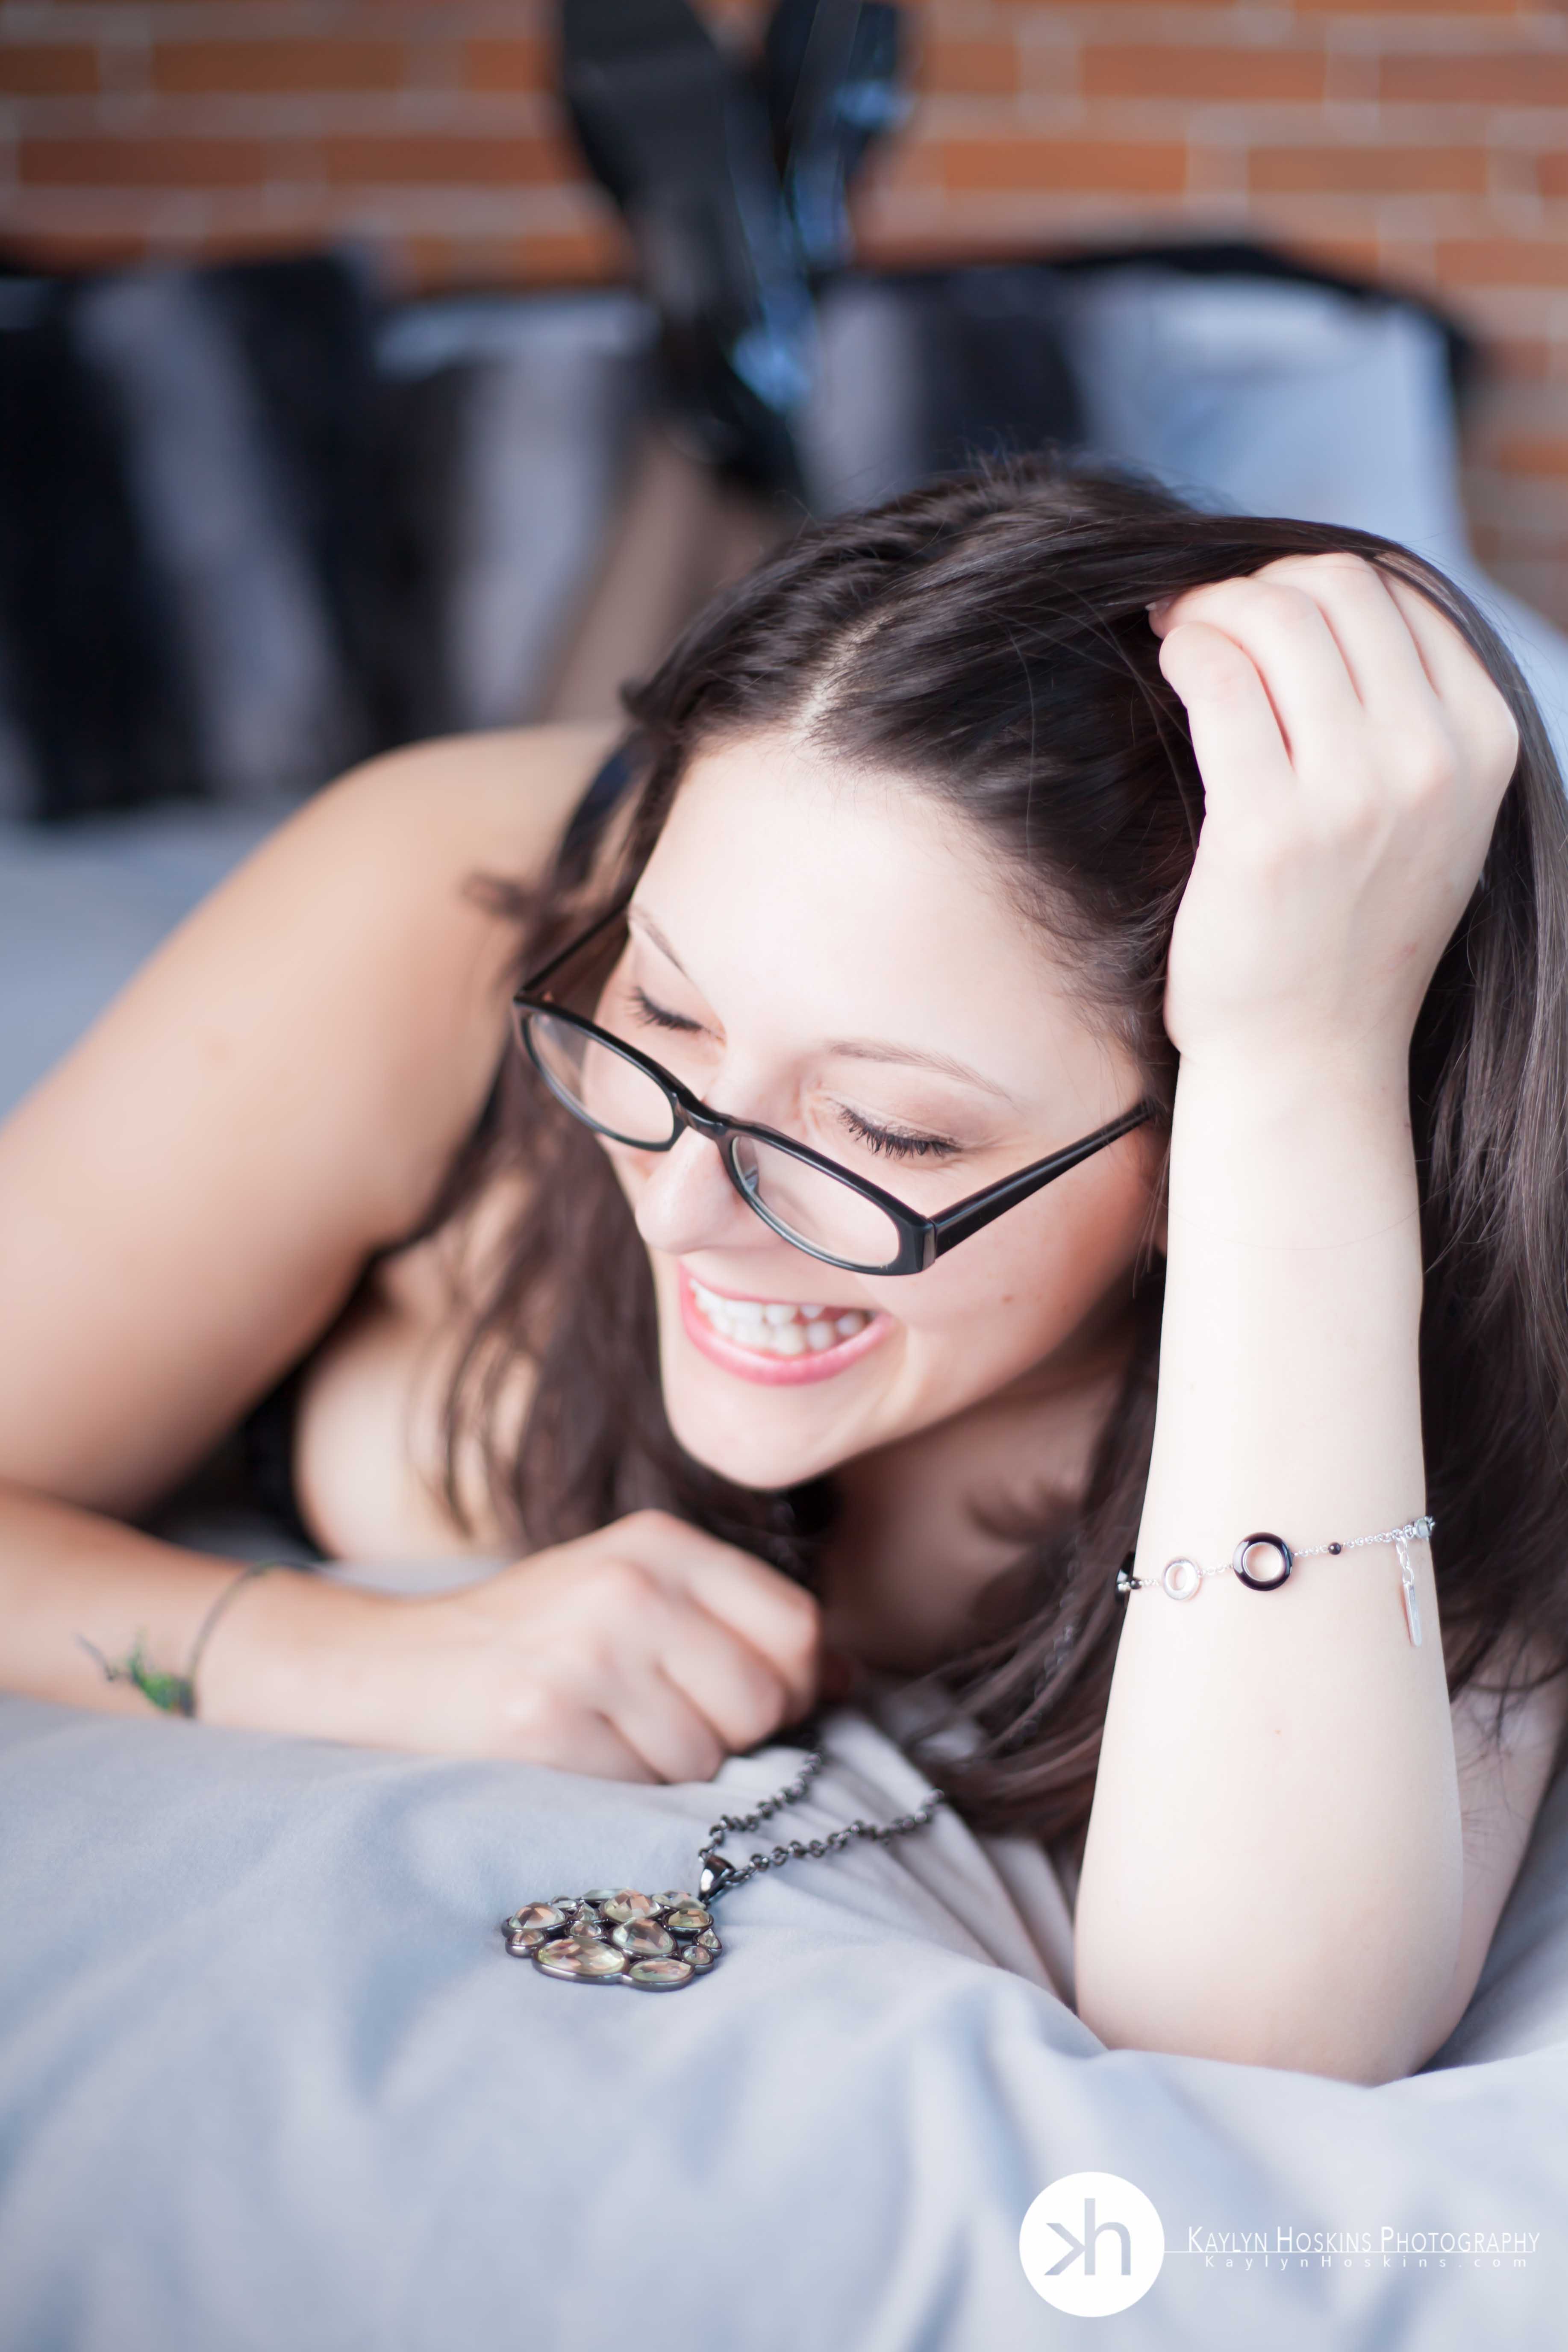 Suzie giggles while laying on bed during boudoir experience